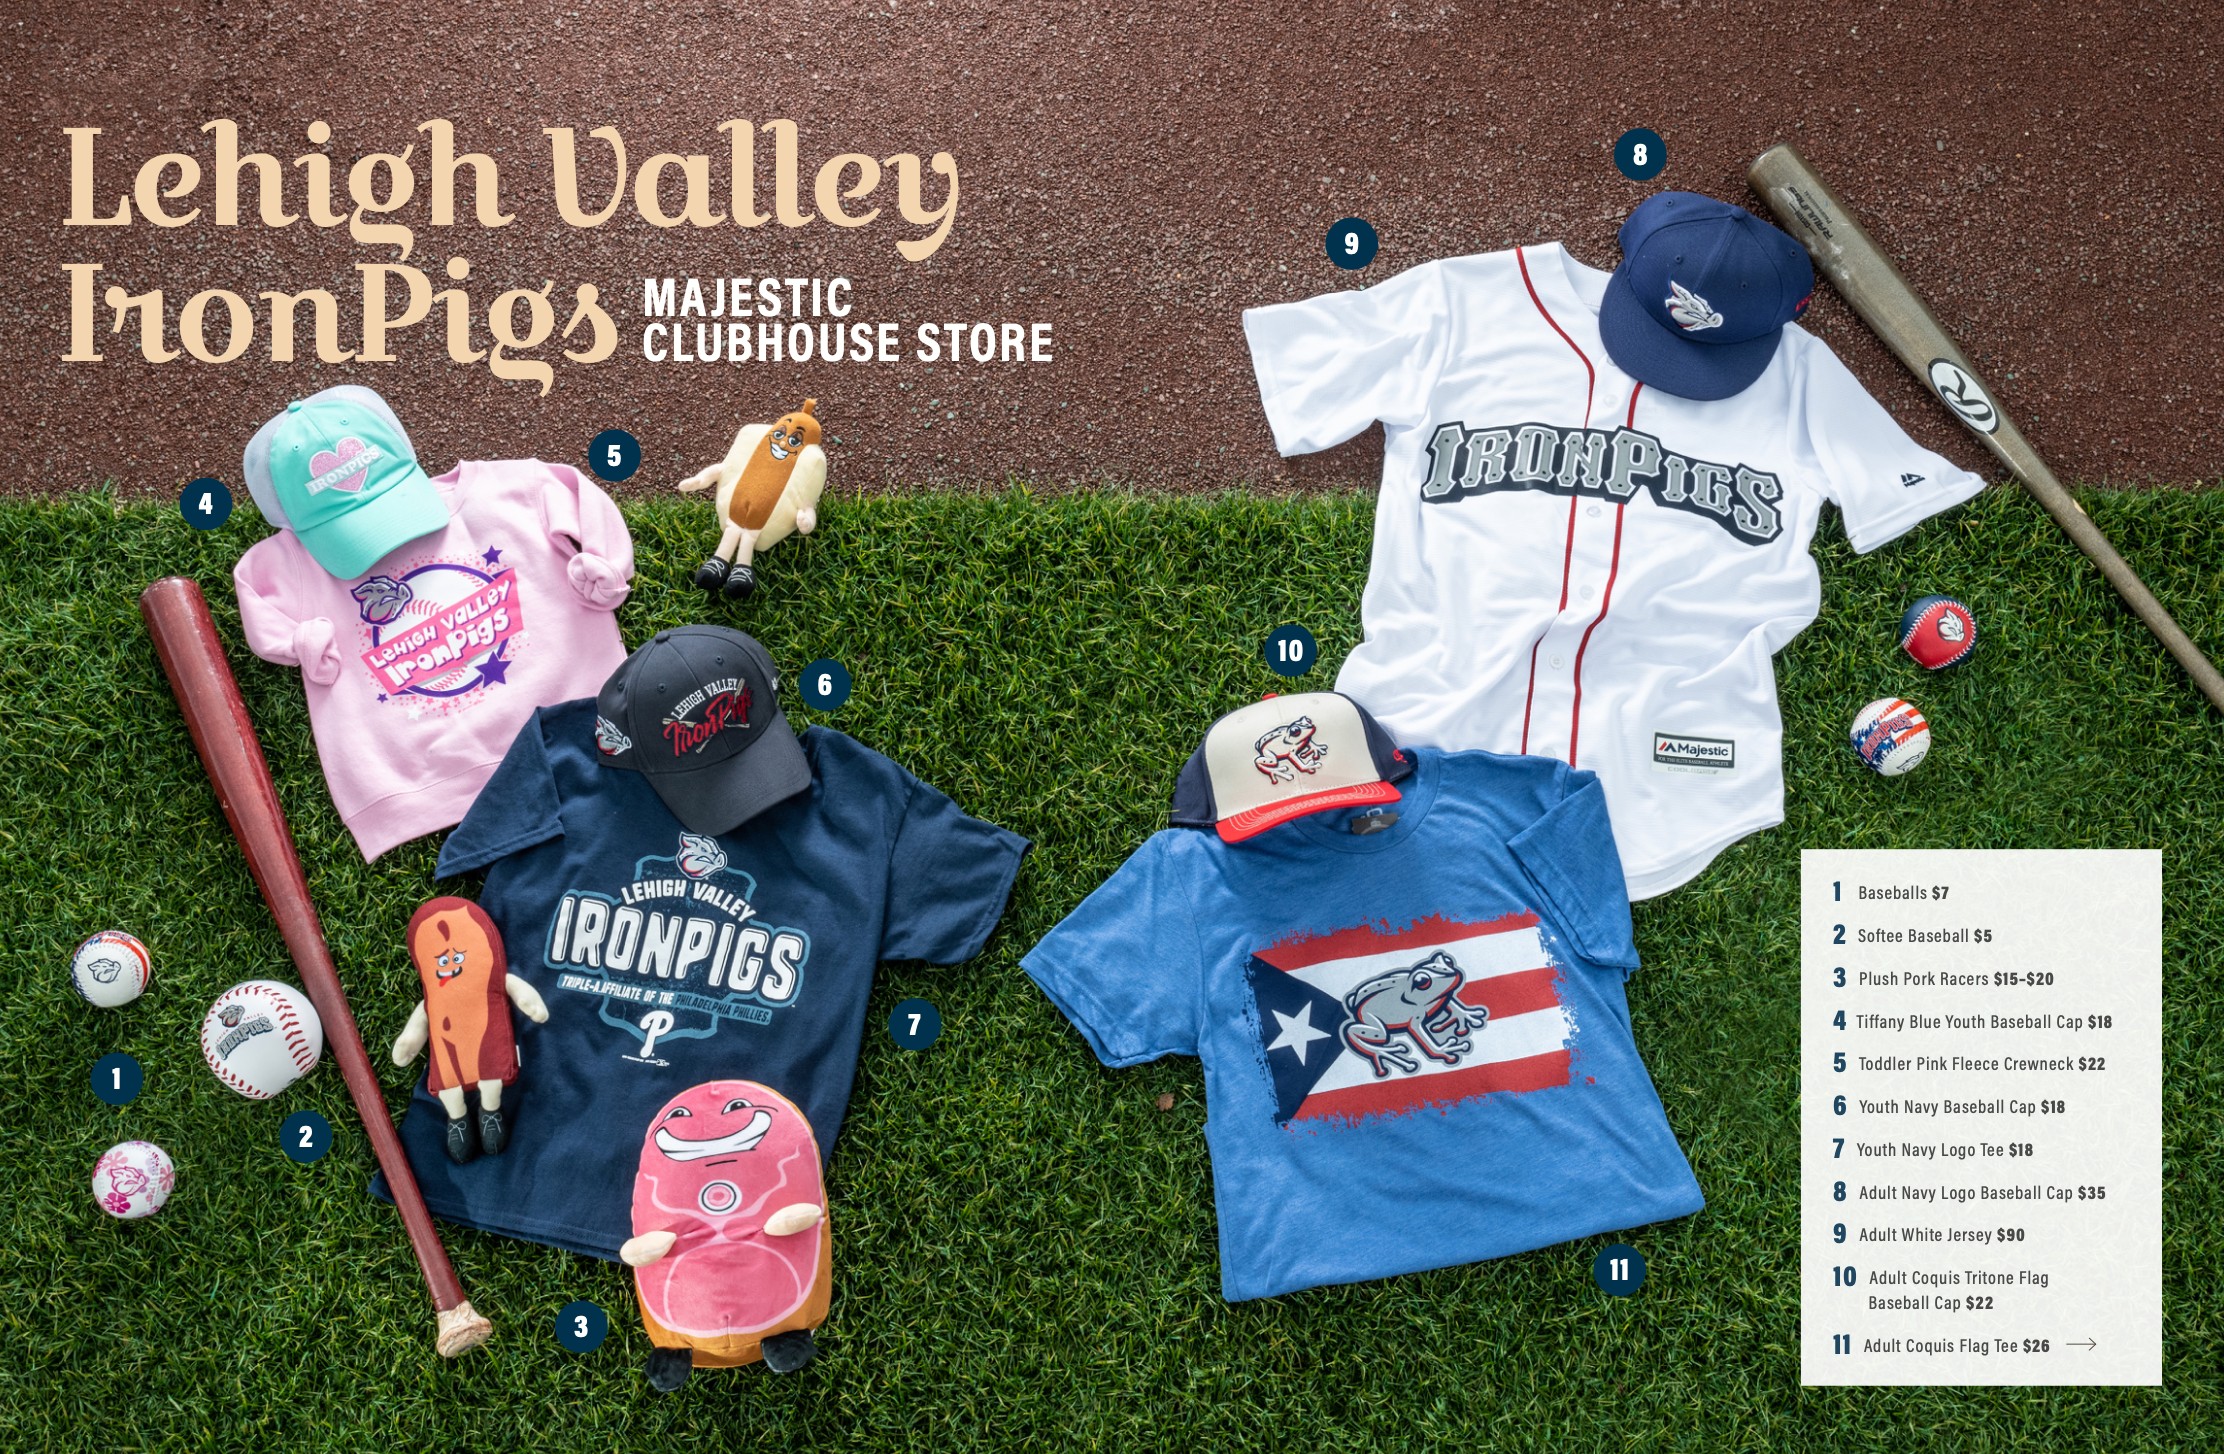 Play Ball! Majestic Athletic is in on the Action - Lehigh Valley